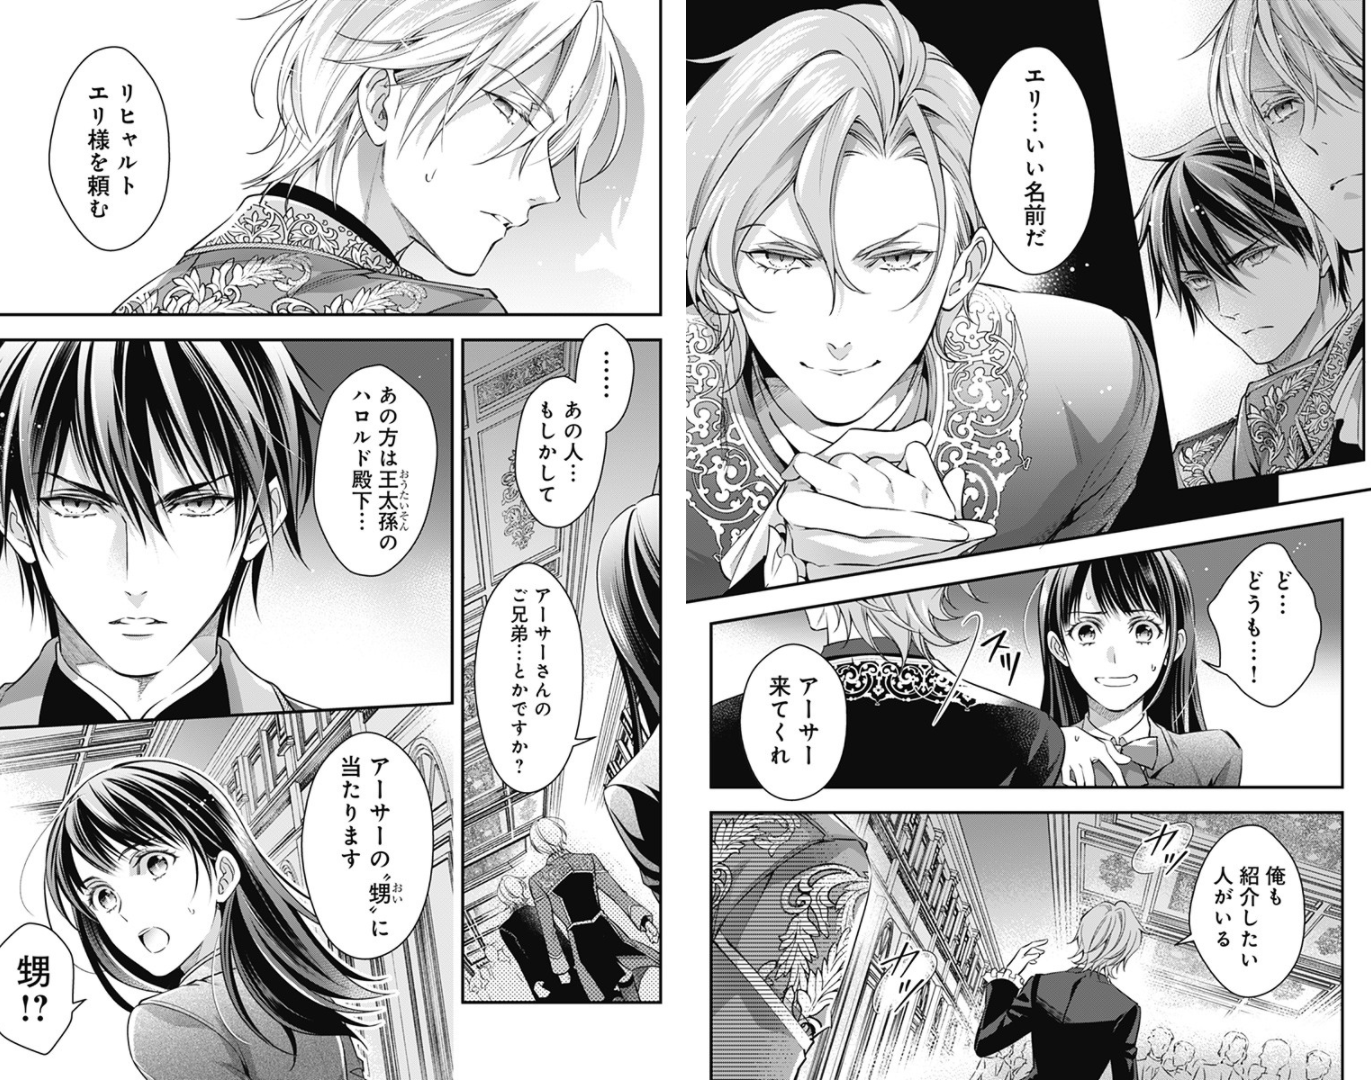 Ikémen fangirl on X: World's end harem Britannia Lumiere  (#終末のハーレムBritanniaLumiere) Story by: LINK #Manga: Kira Etou In a world of  men, the girl was taken there with 4 women!? To save this